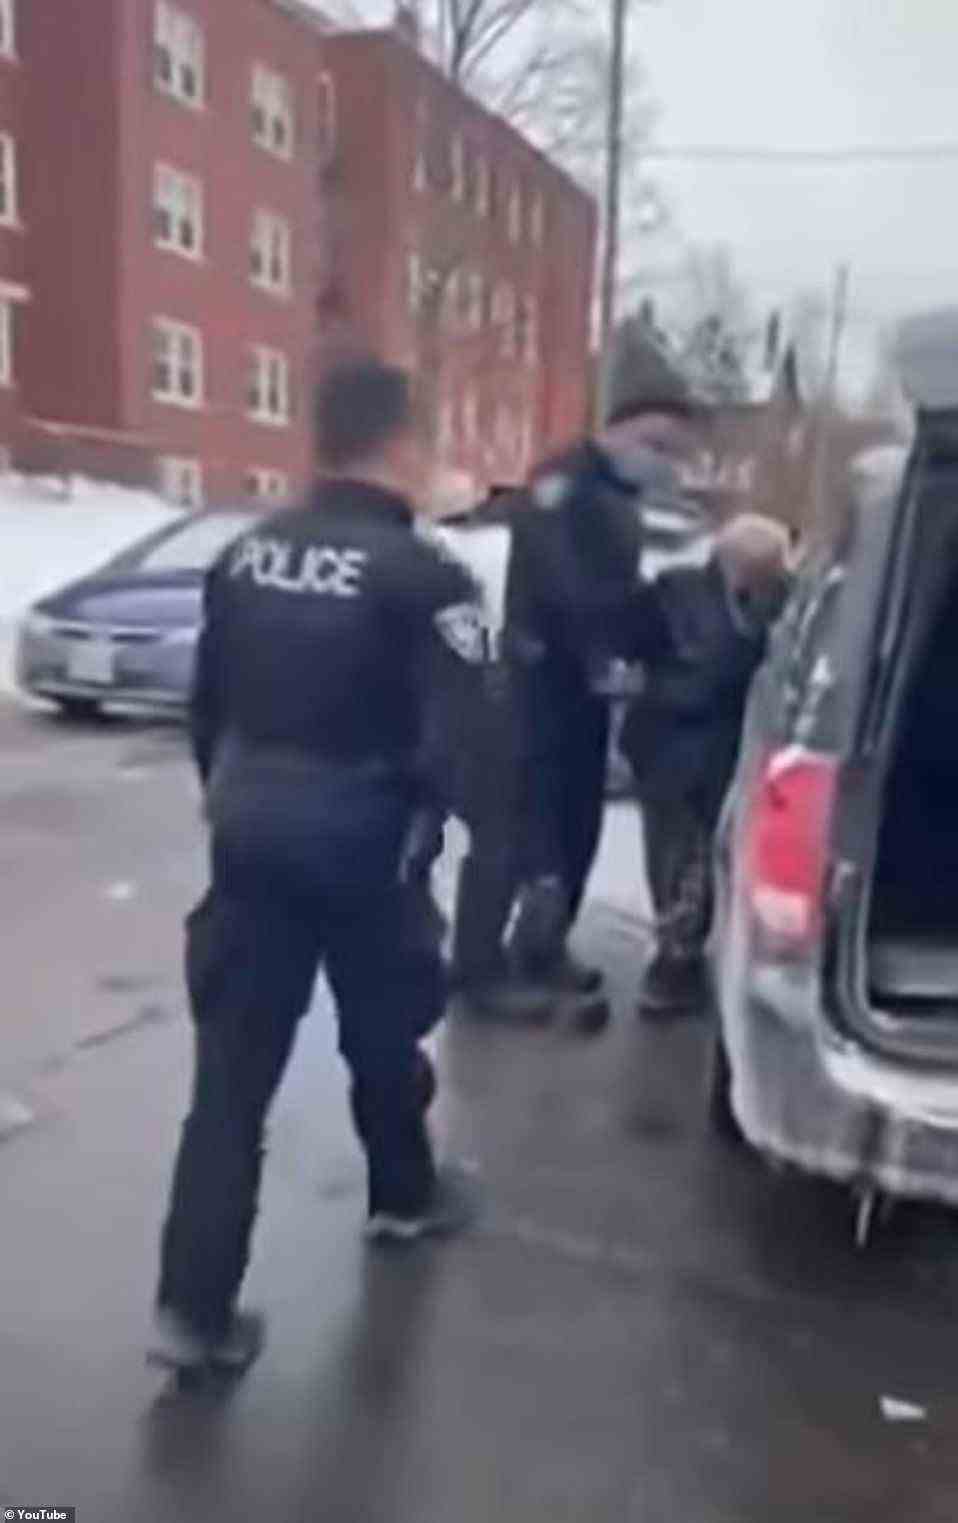 'This is b******. Communist f****** police,' a bystander yells as police arrest a man for honking in Ottawa on Sunday, a day before a judge outlawed honking, as protests against COVID-19 vaccine mandates continue